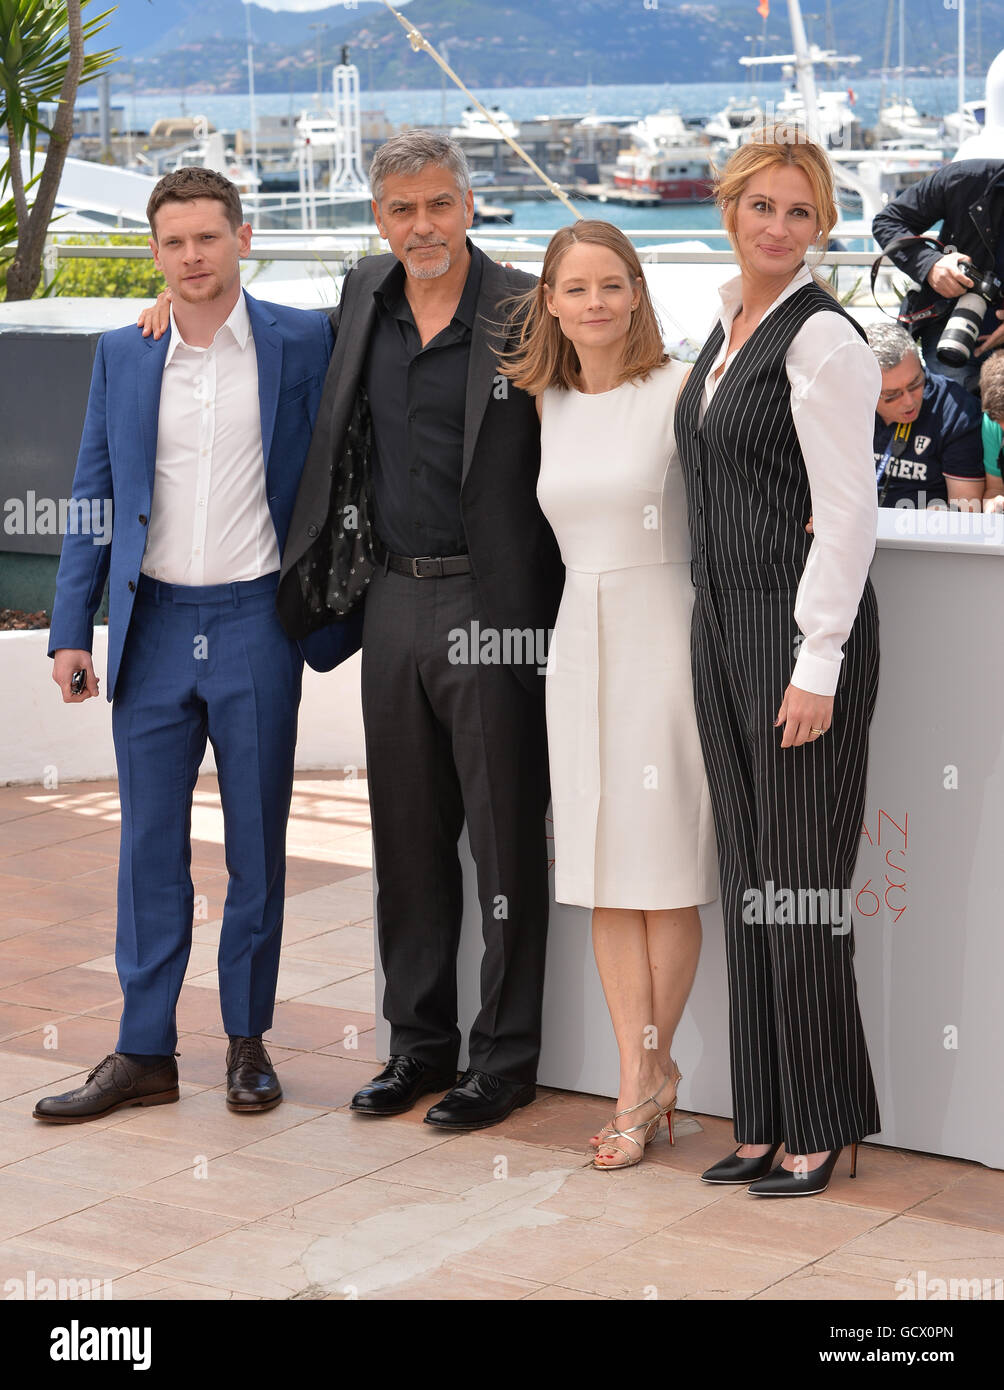 CANNES, FR - MAY 12, 2016: Actress/director Jodie Foster & actors Jack O'Connell, George Clooney & Julia Roberts at the photocall for "Money Monster" at the 69th Festival de Cannes. Stock Photo